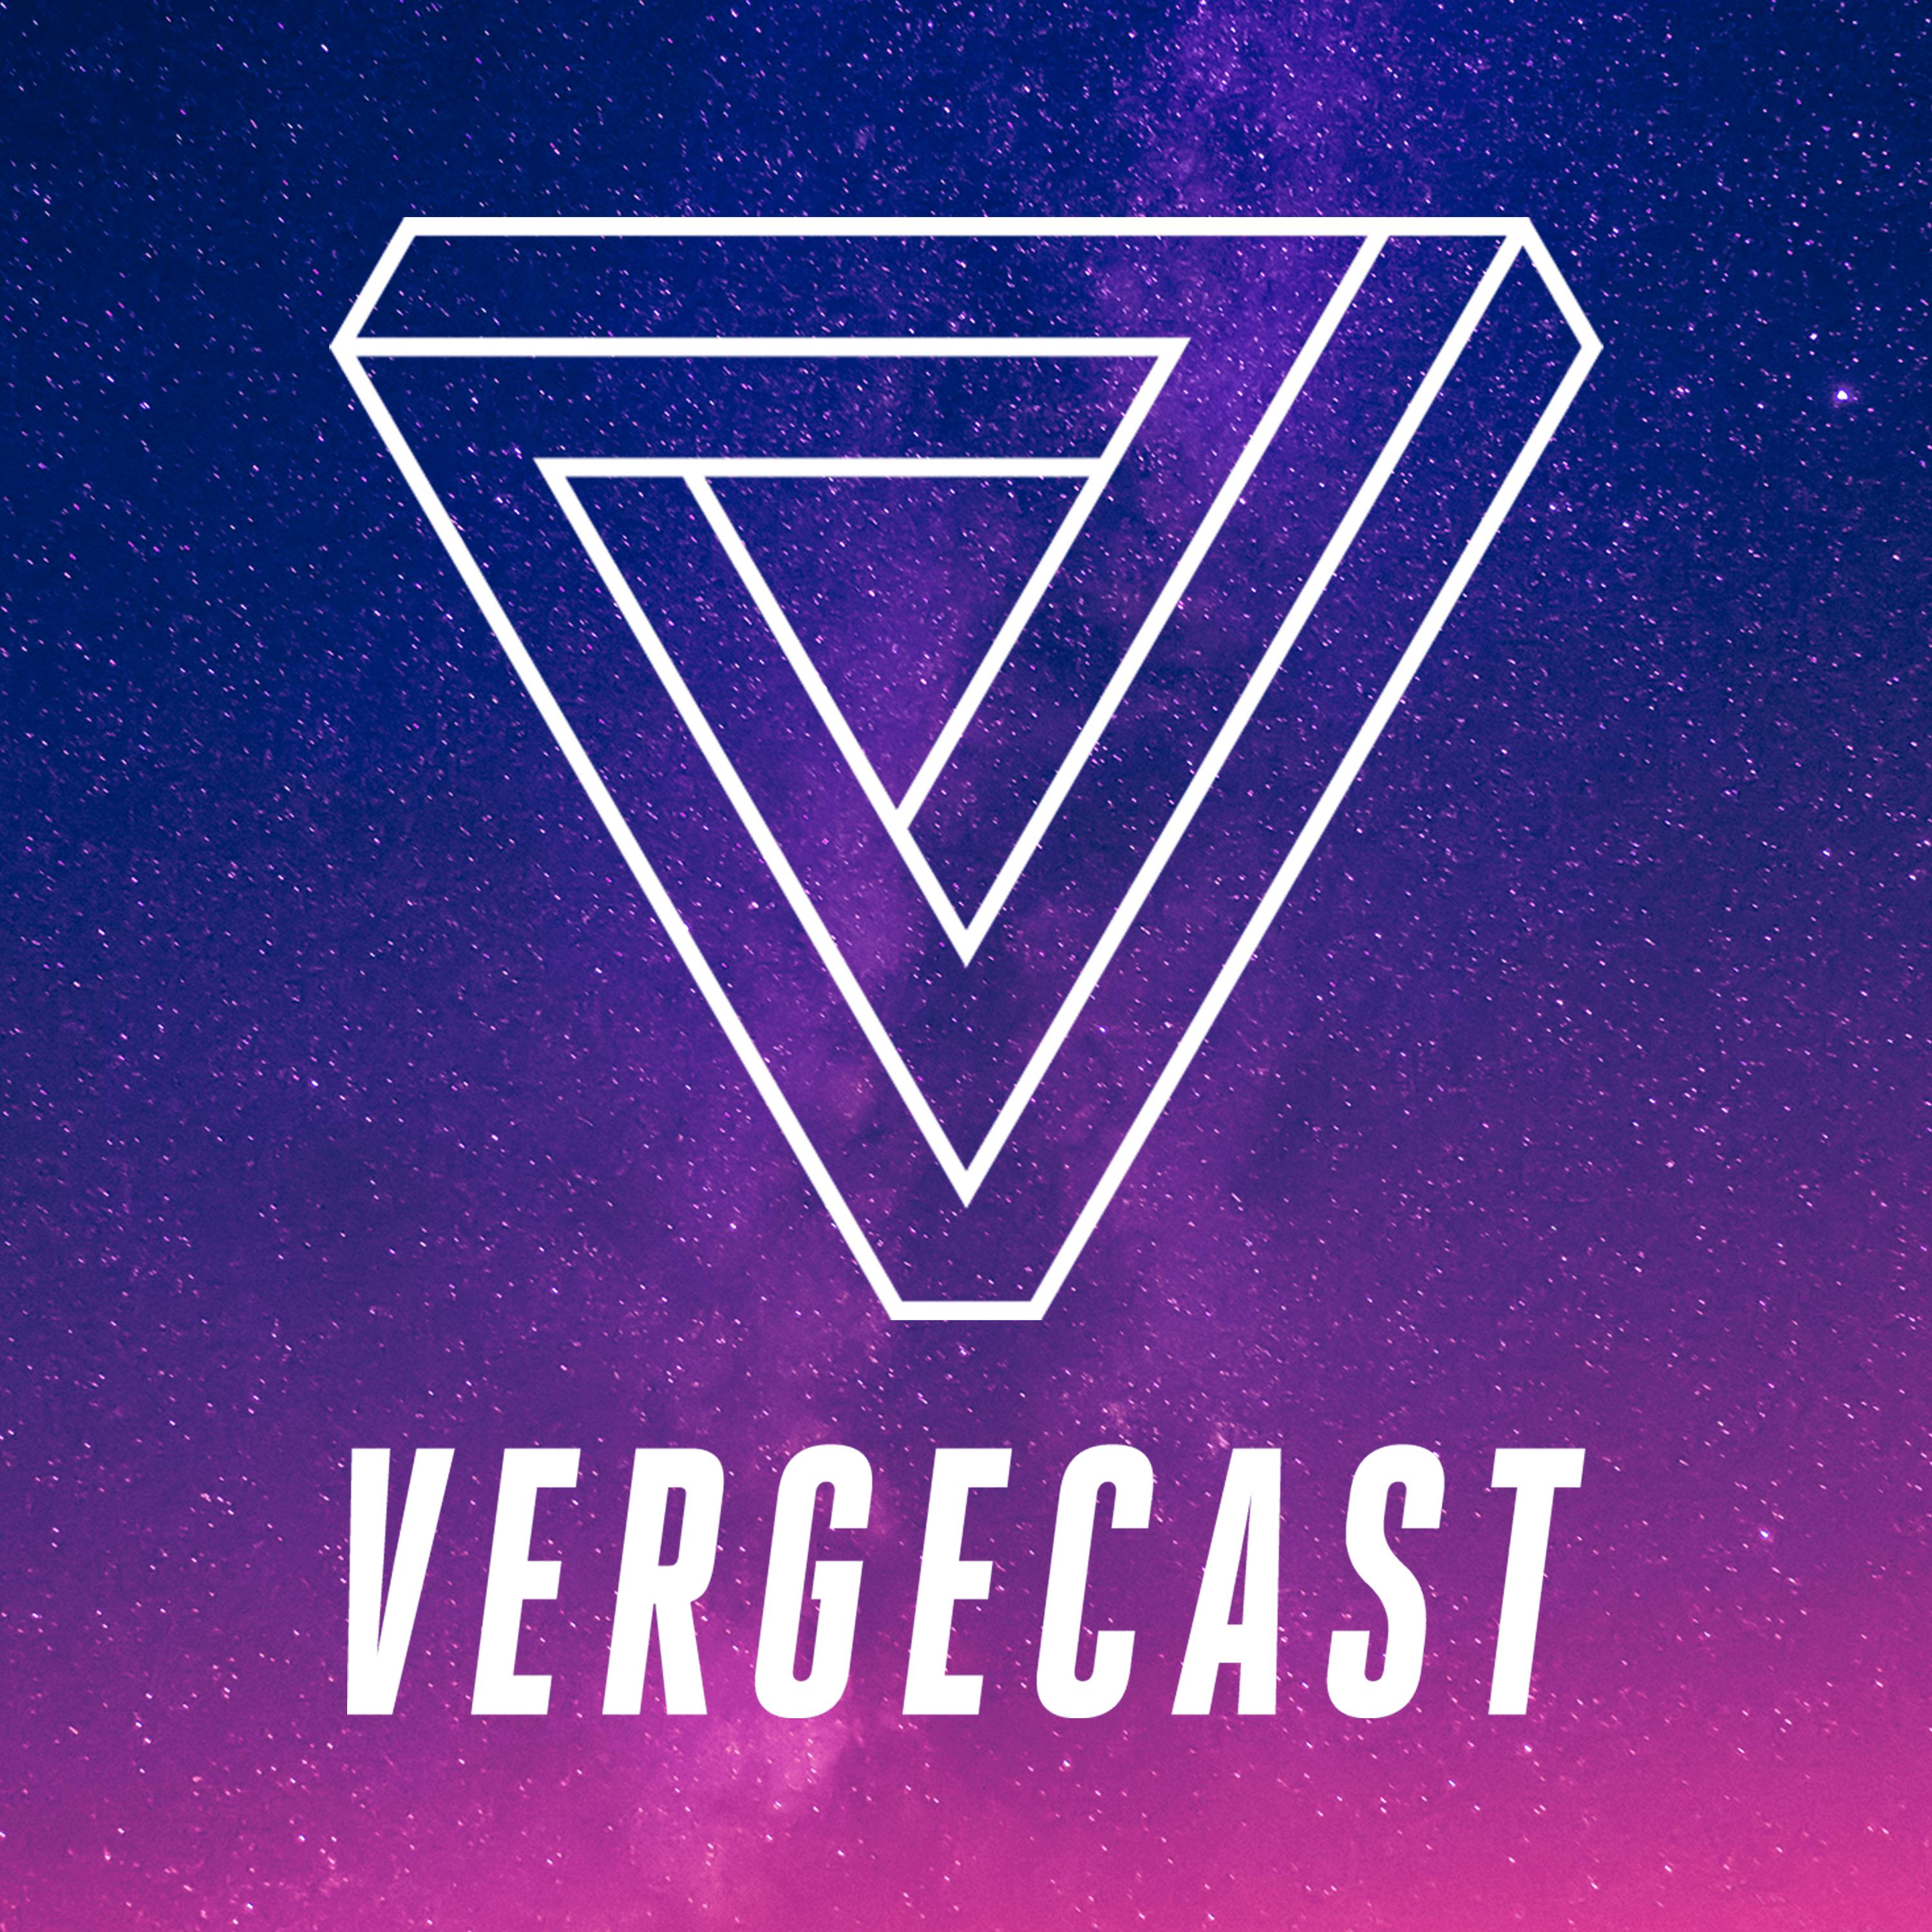 The Vergecast Podcast Addict - imagine dragons code for walking the wire roblox